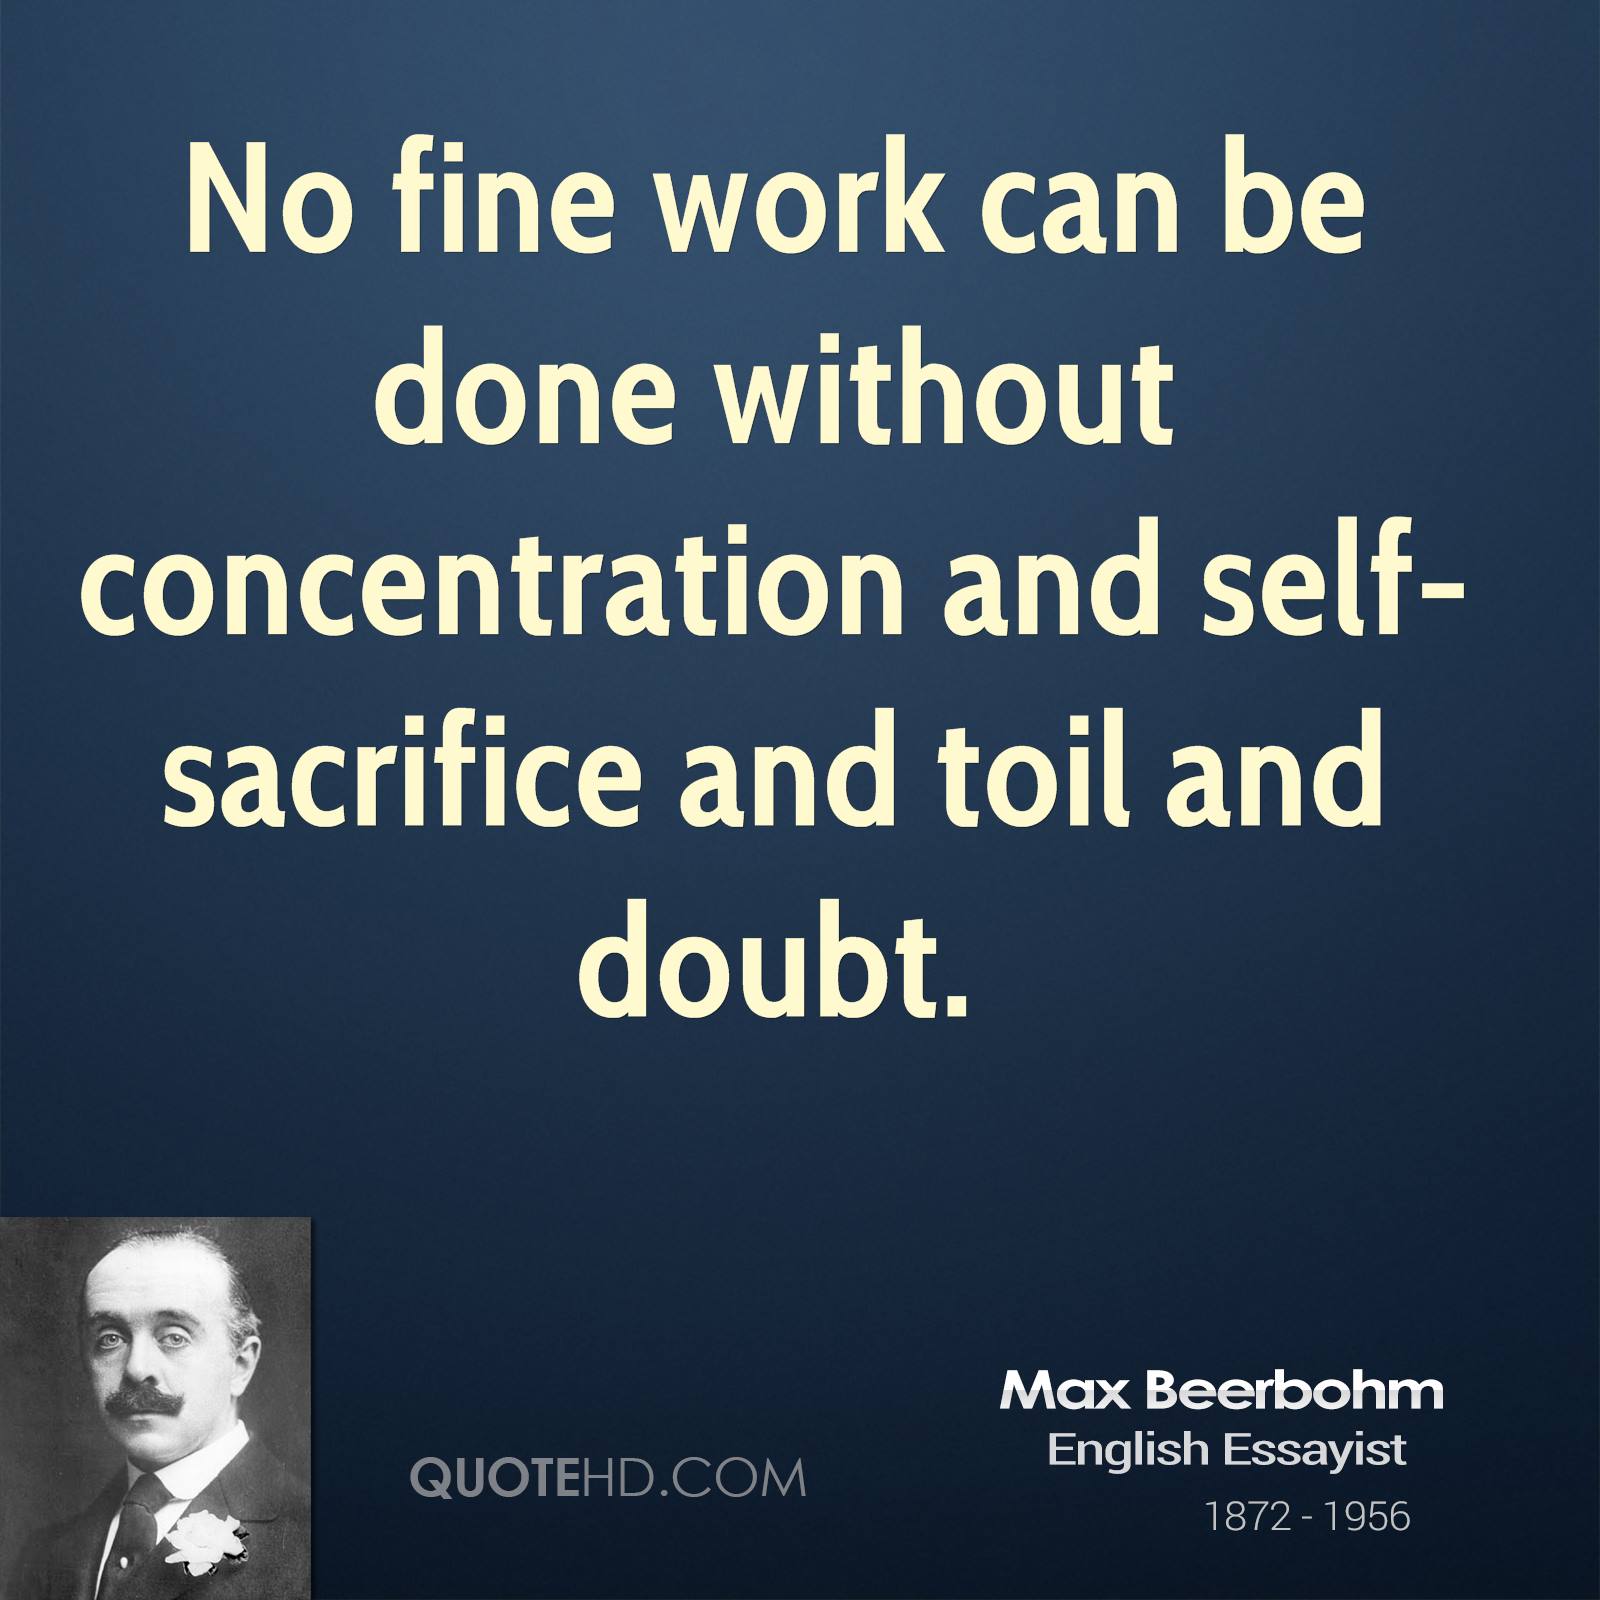 No fine work can be done without concentration and self-sacrifice and toil and doubt. Max Beerbohm